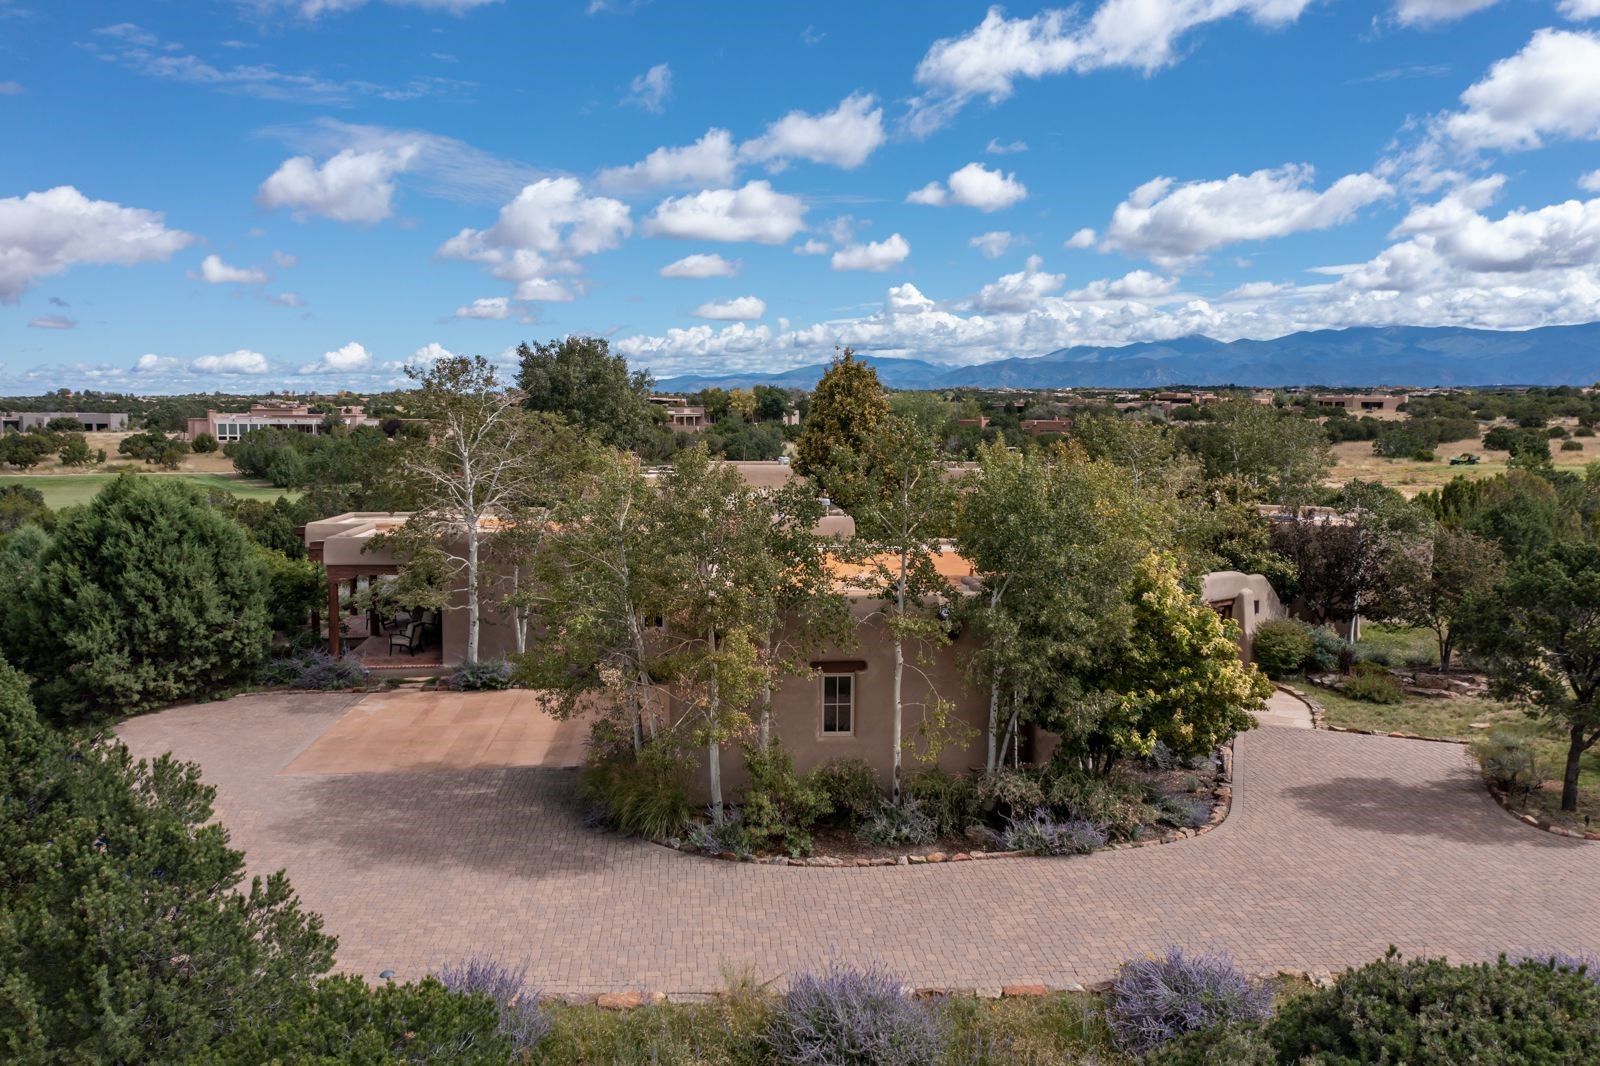 4 Eagle Nest Circle, Santa Fe, New Mexico 87506, 3 Bedrooms Bedrooms, ,4 BathroomsBathrooms,Residential,For Sale,4 Eagle Nest Circle,202232947